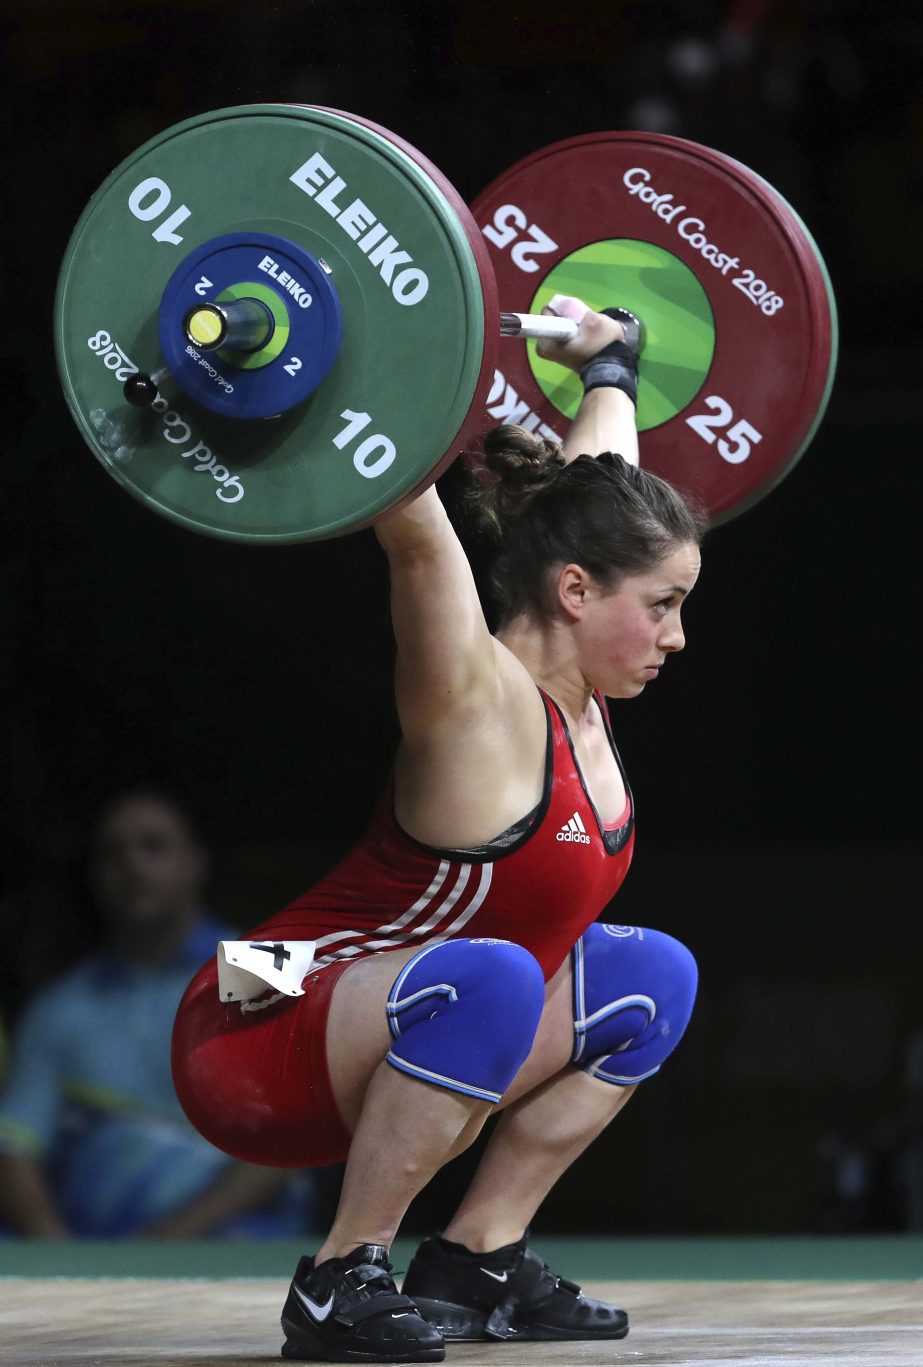 Canada's Maude Charron lifts to win gold medal in the Women's 63Kg Weightlifting final at the Commonwealth Games in Gold Coast, Australia on Saturday.